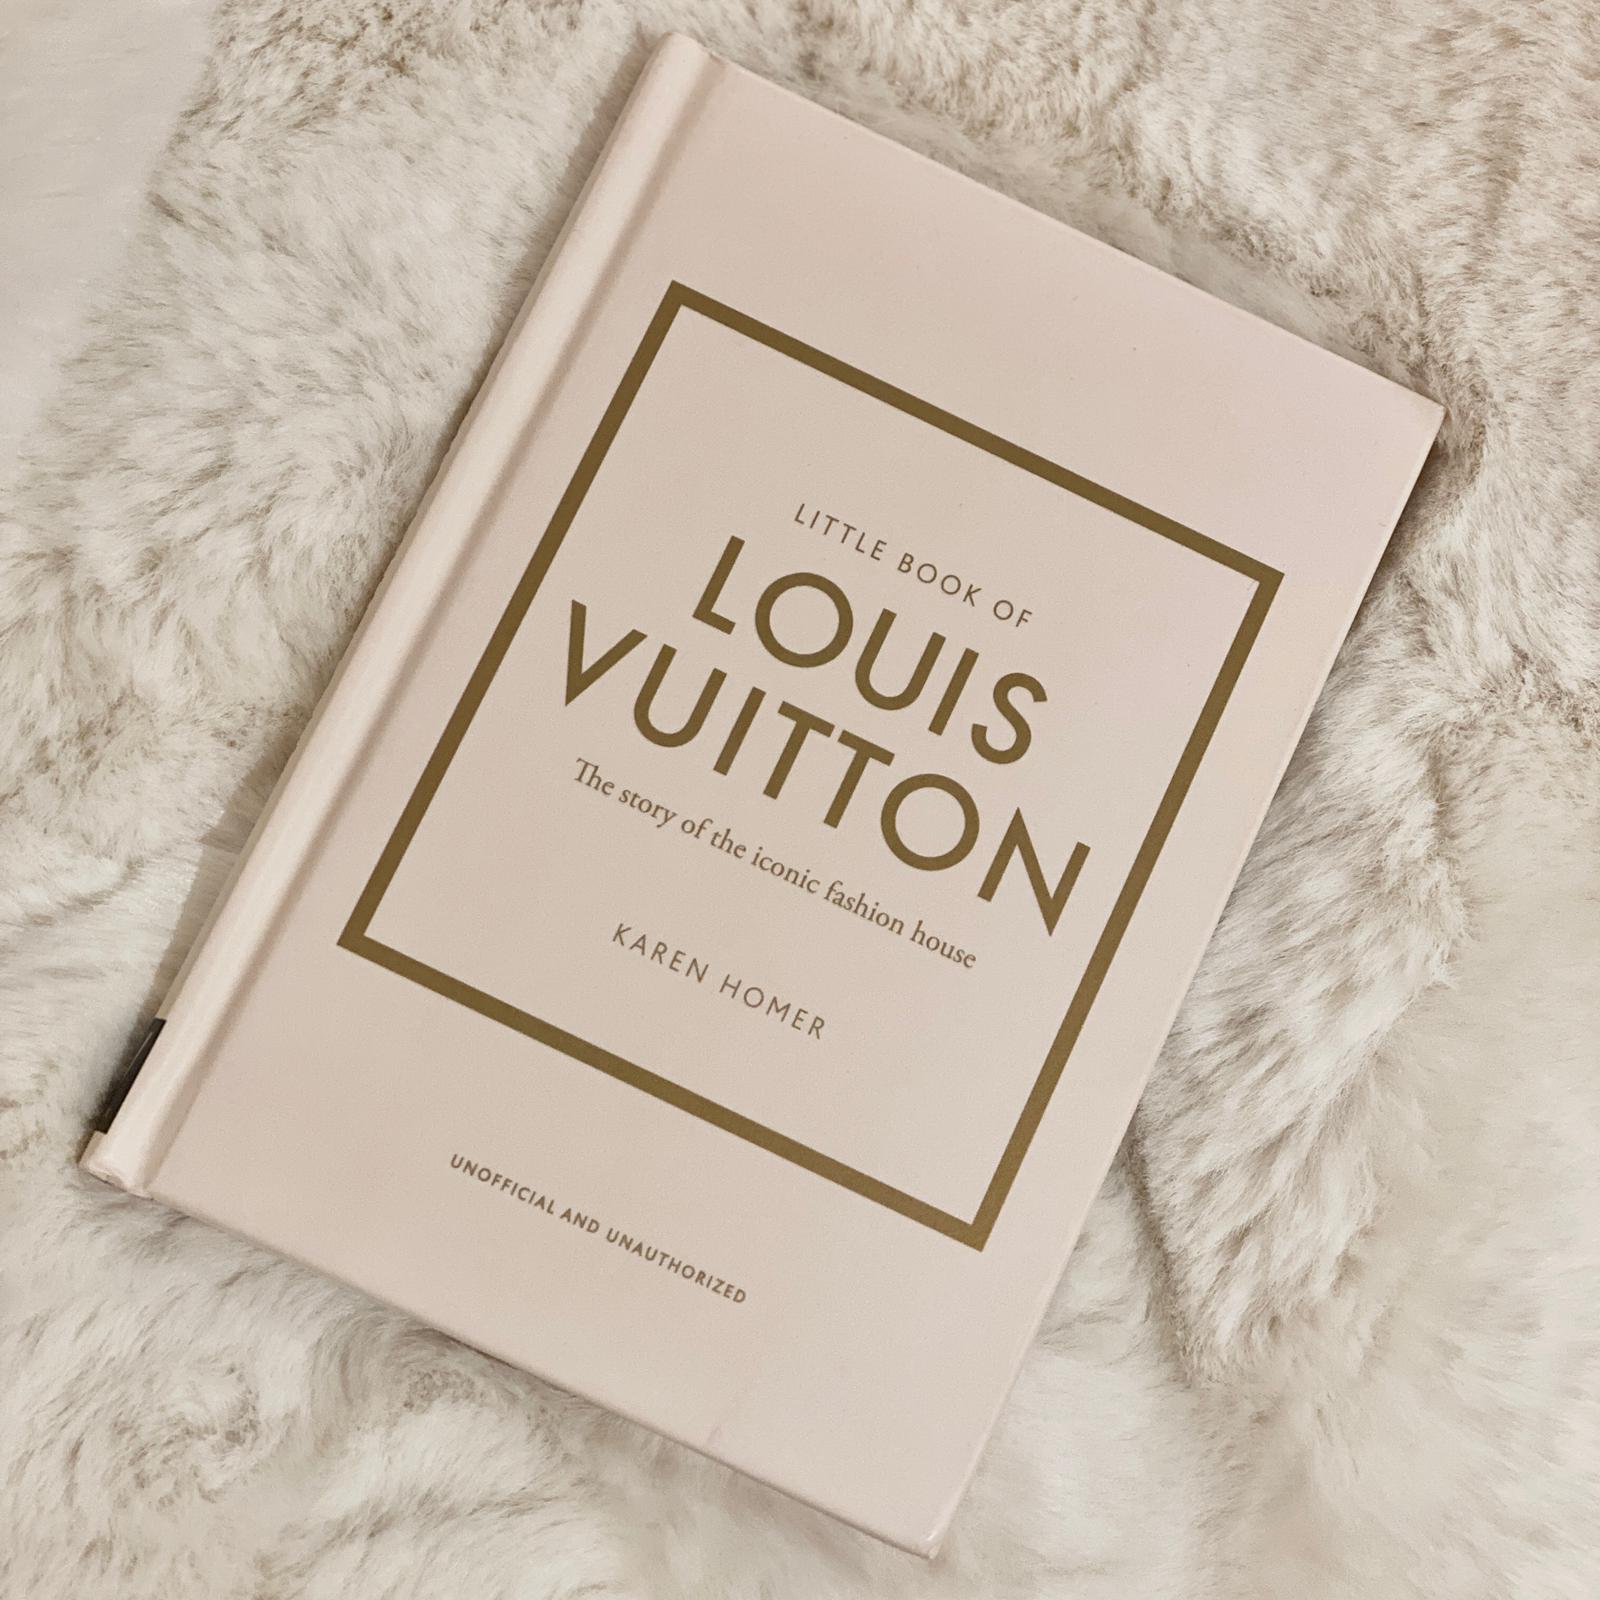 Louis Vuitton Return Policy After 30 Days  NAR Media Kit